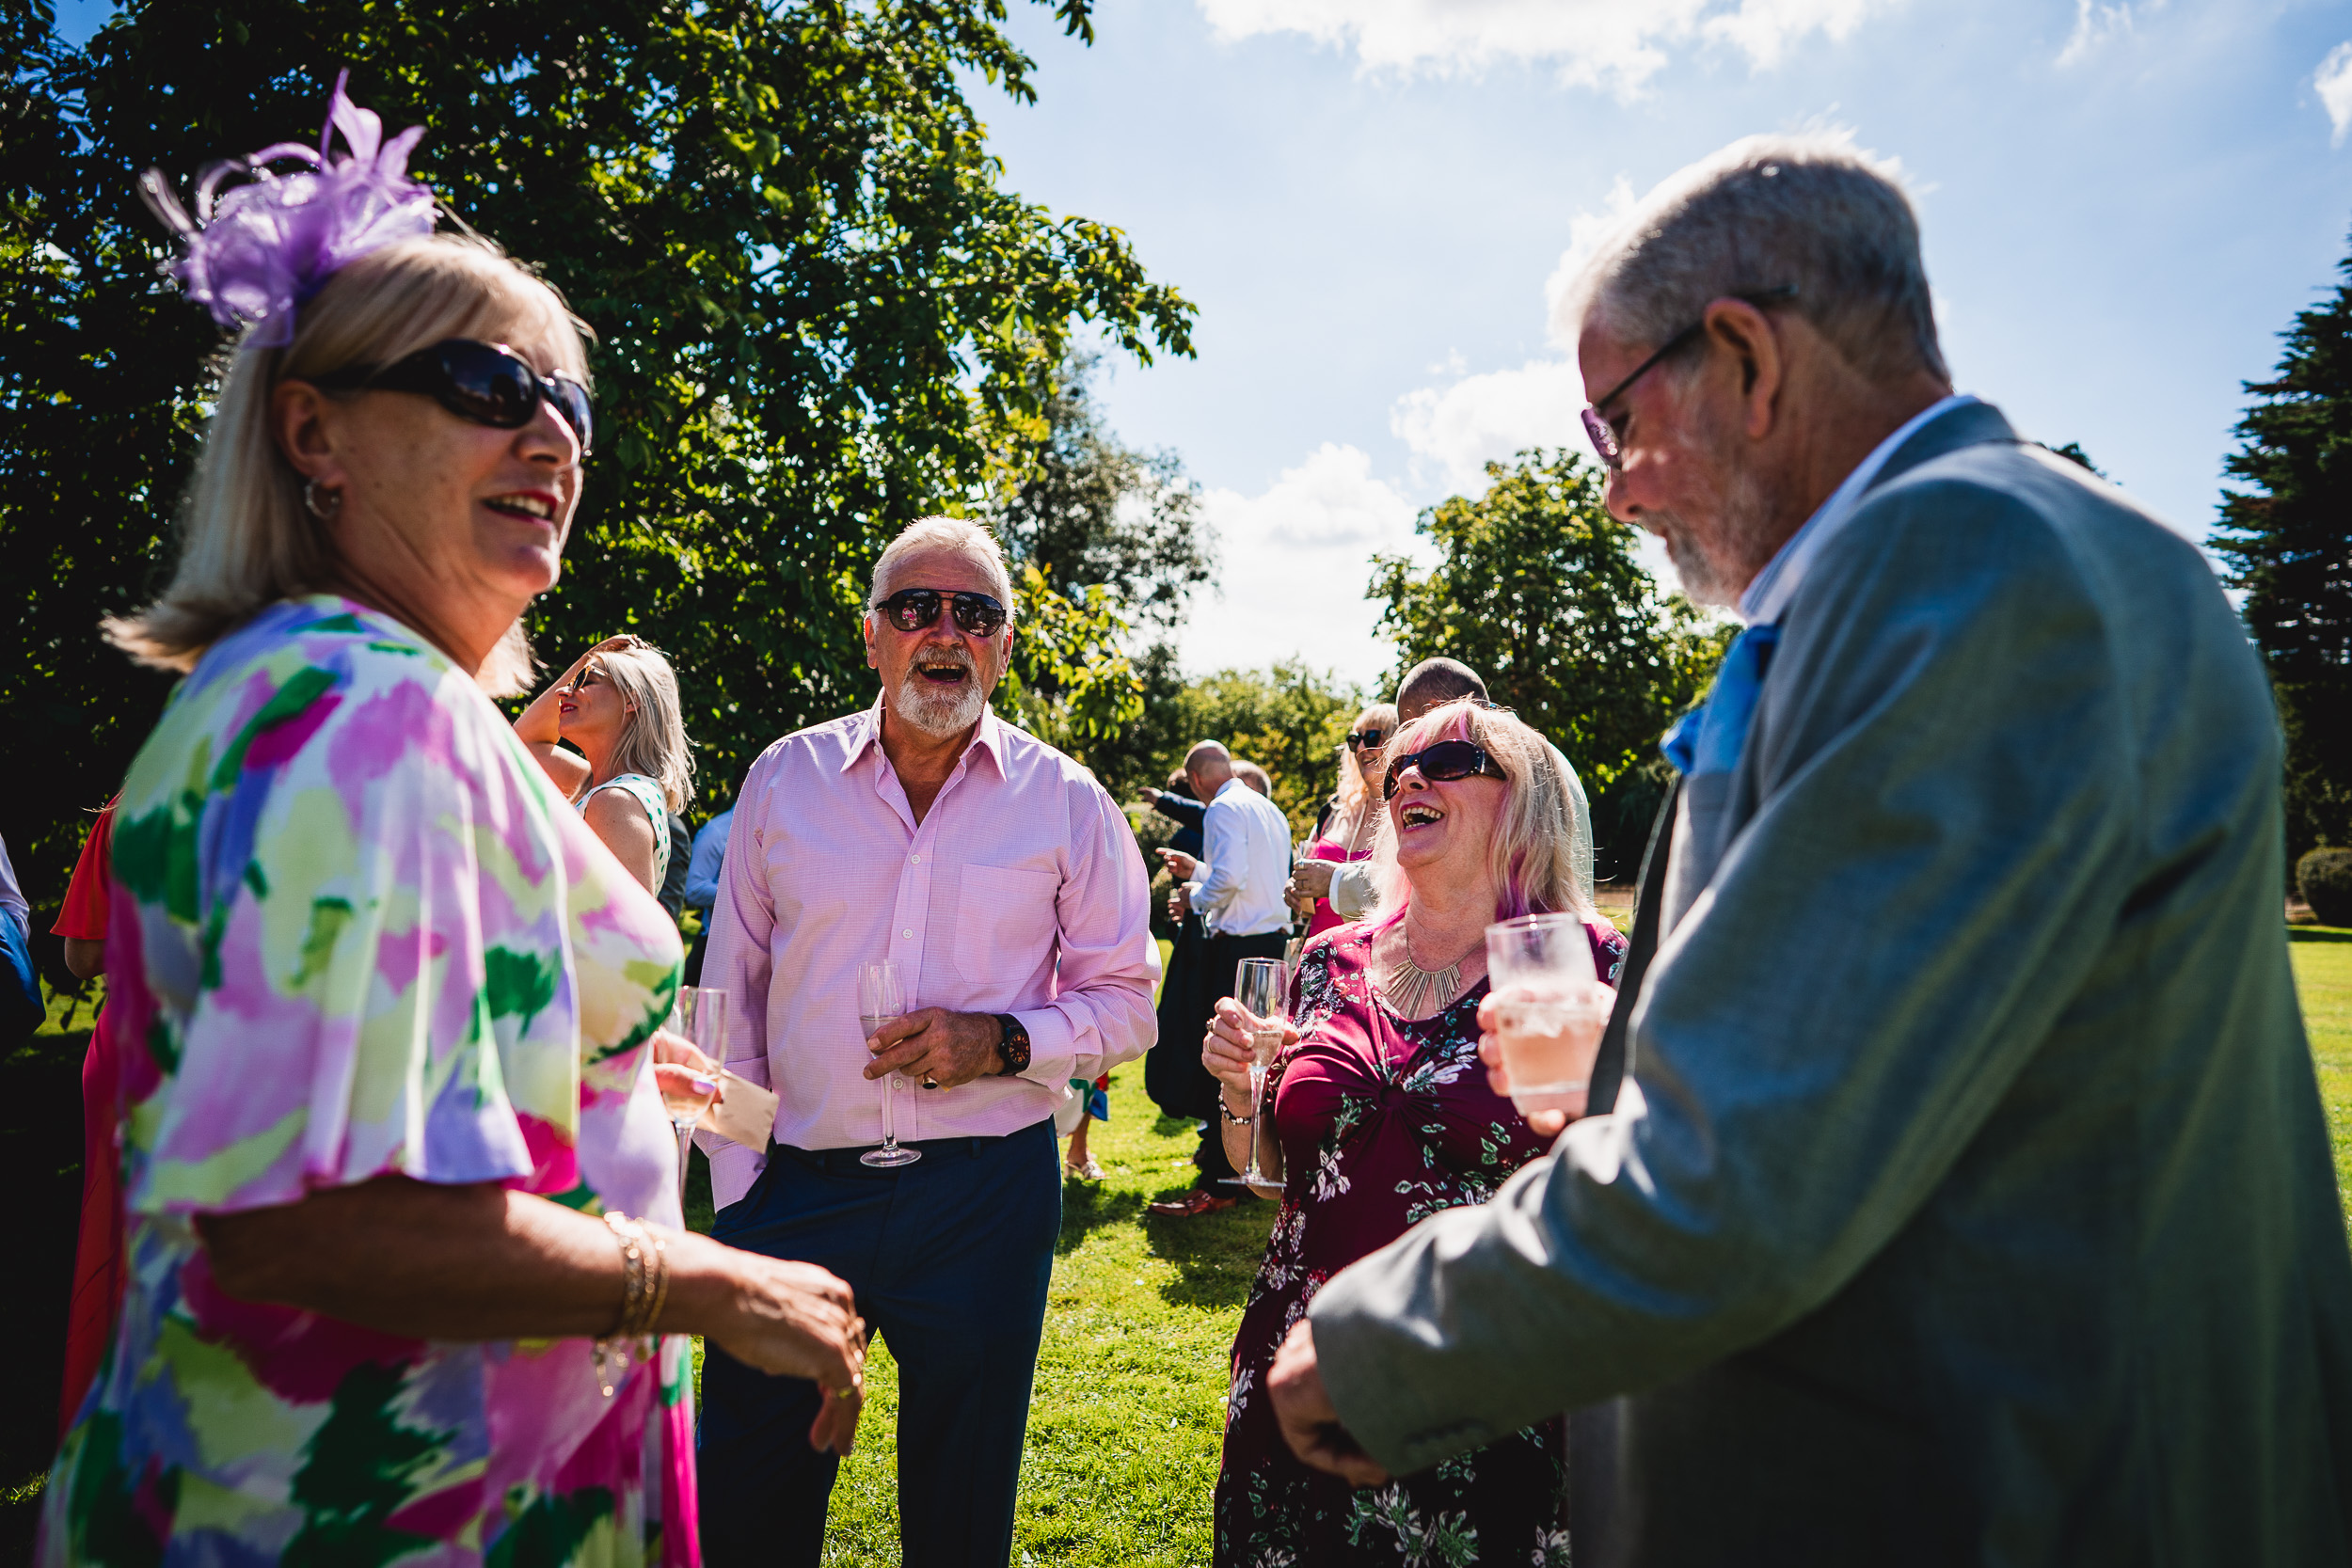 A group of people talking to each other at an outdoor Surrey Wedding event.